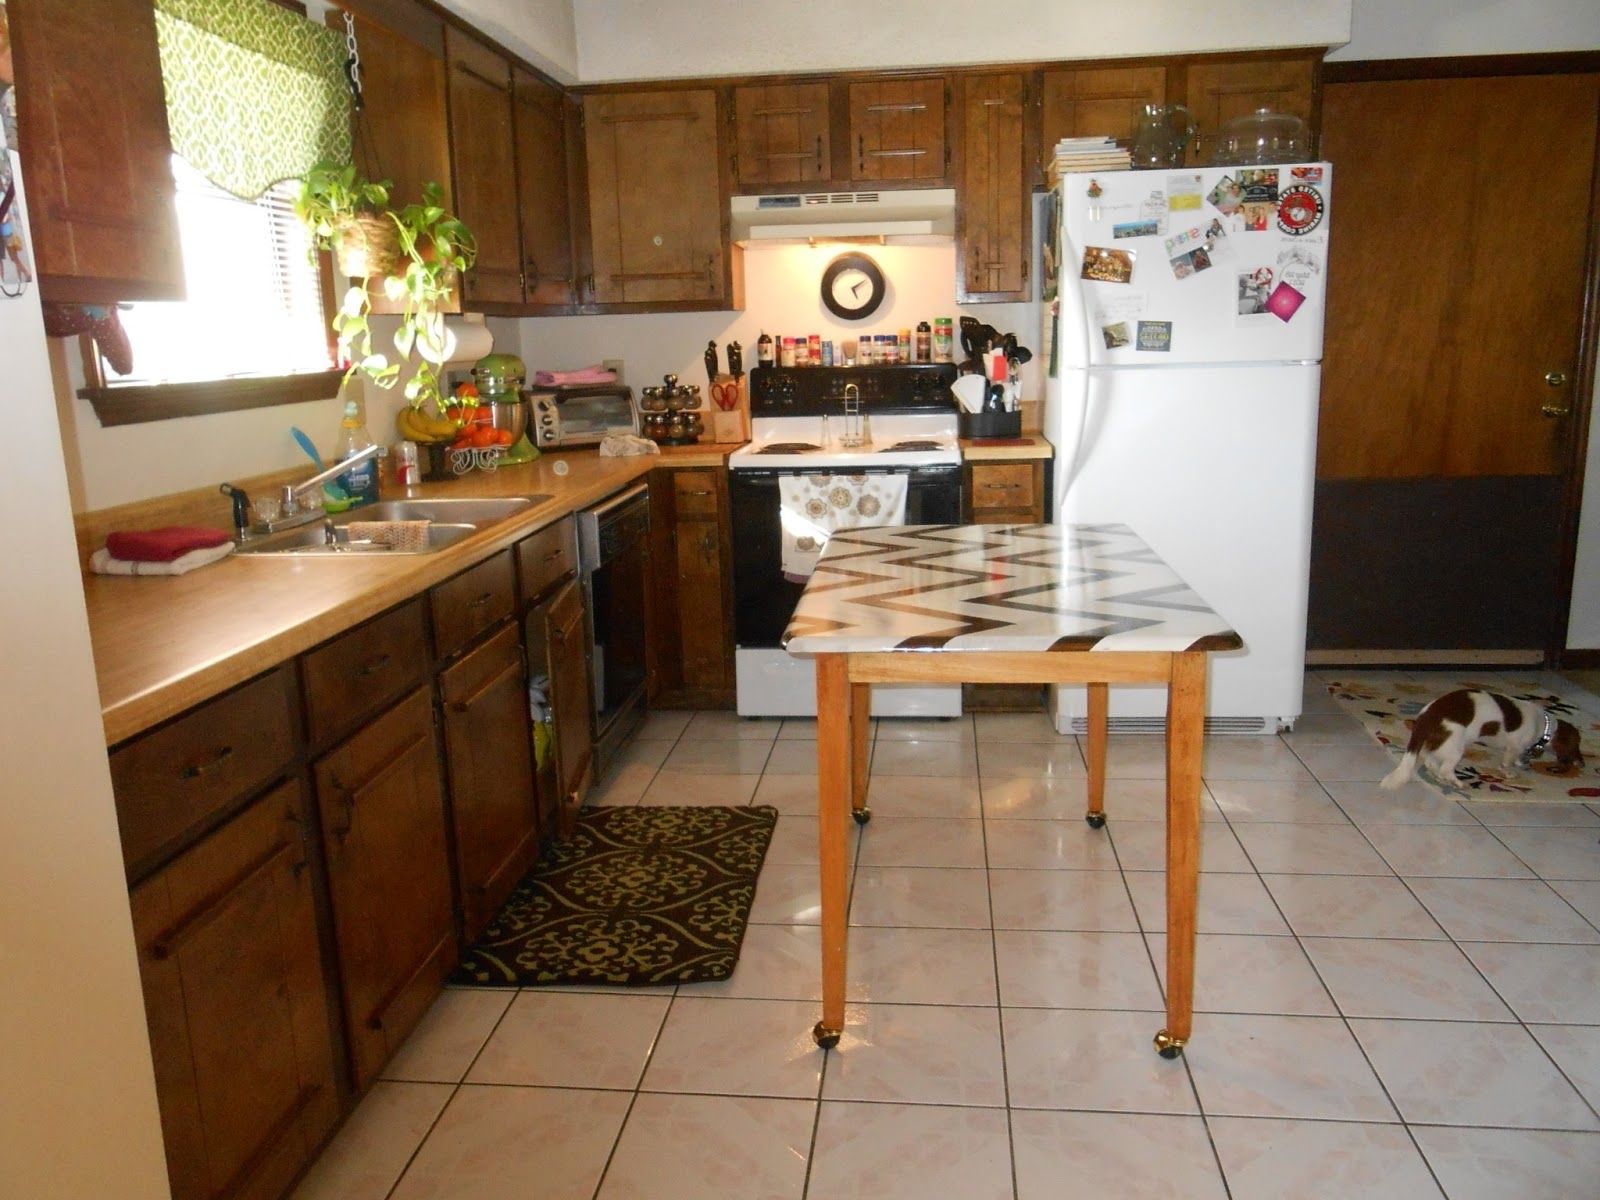 Unique Movable Kitchen Table With Chevron Top Idea Feat Cool Patterned Area Rug And White Refrigerator (Photo 3097 of 7825)